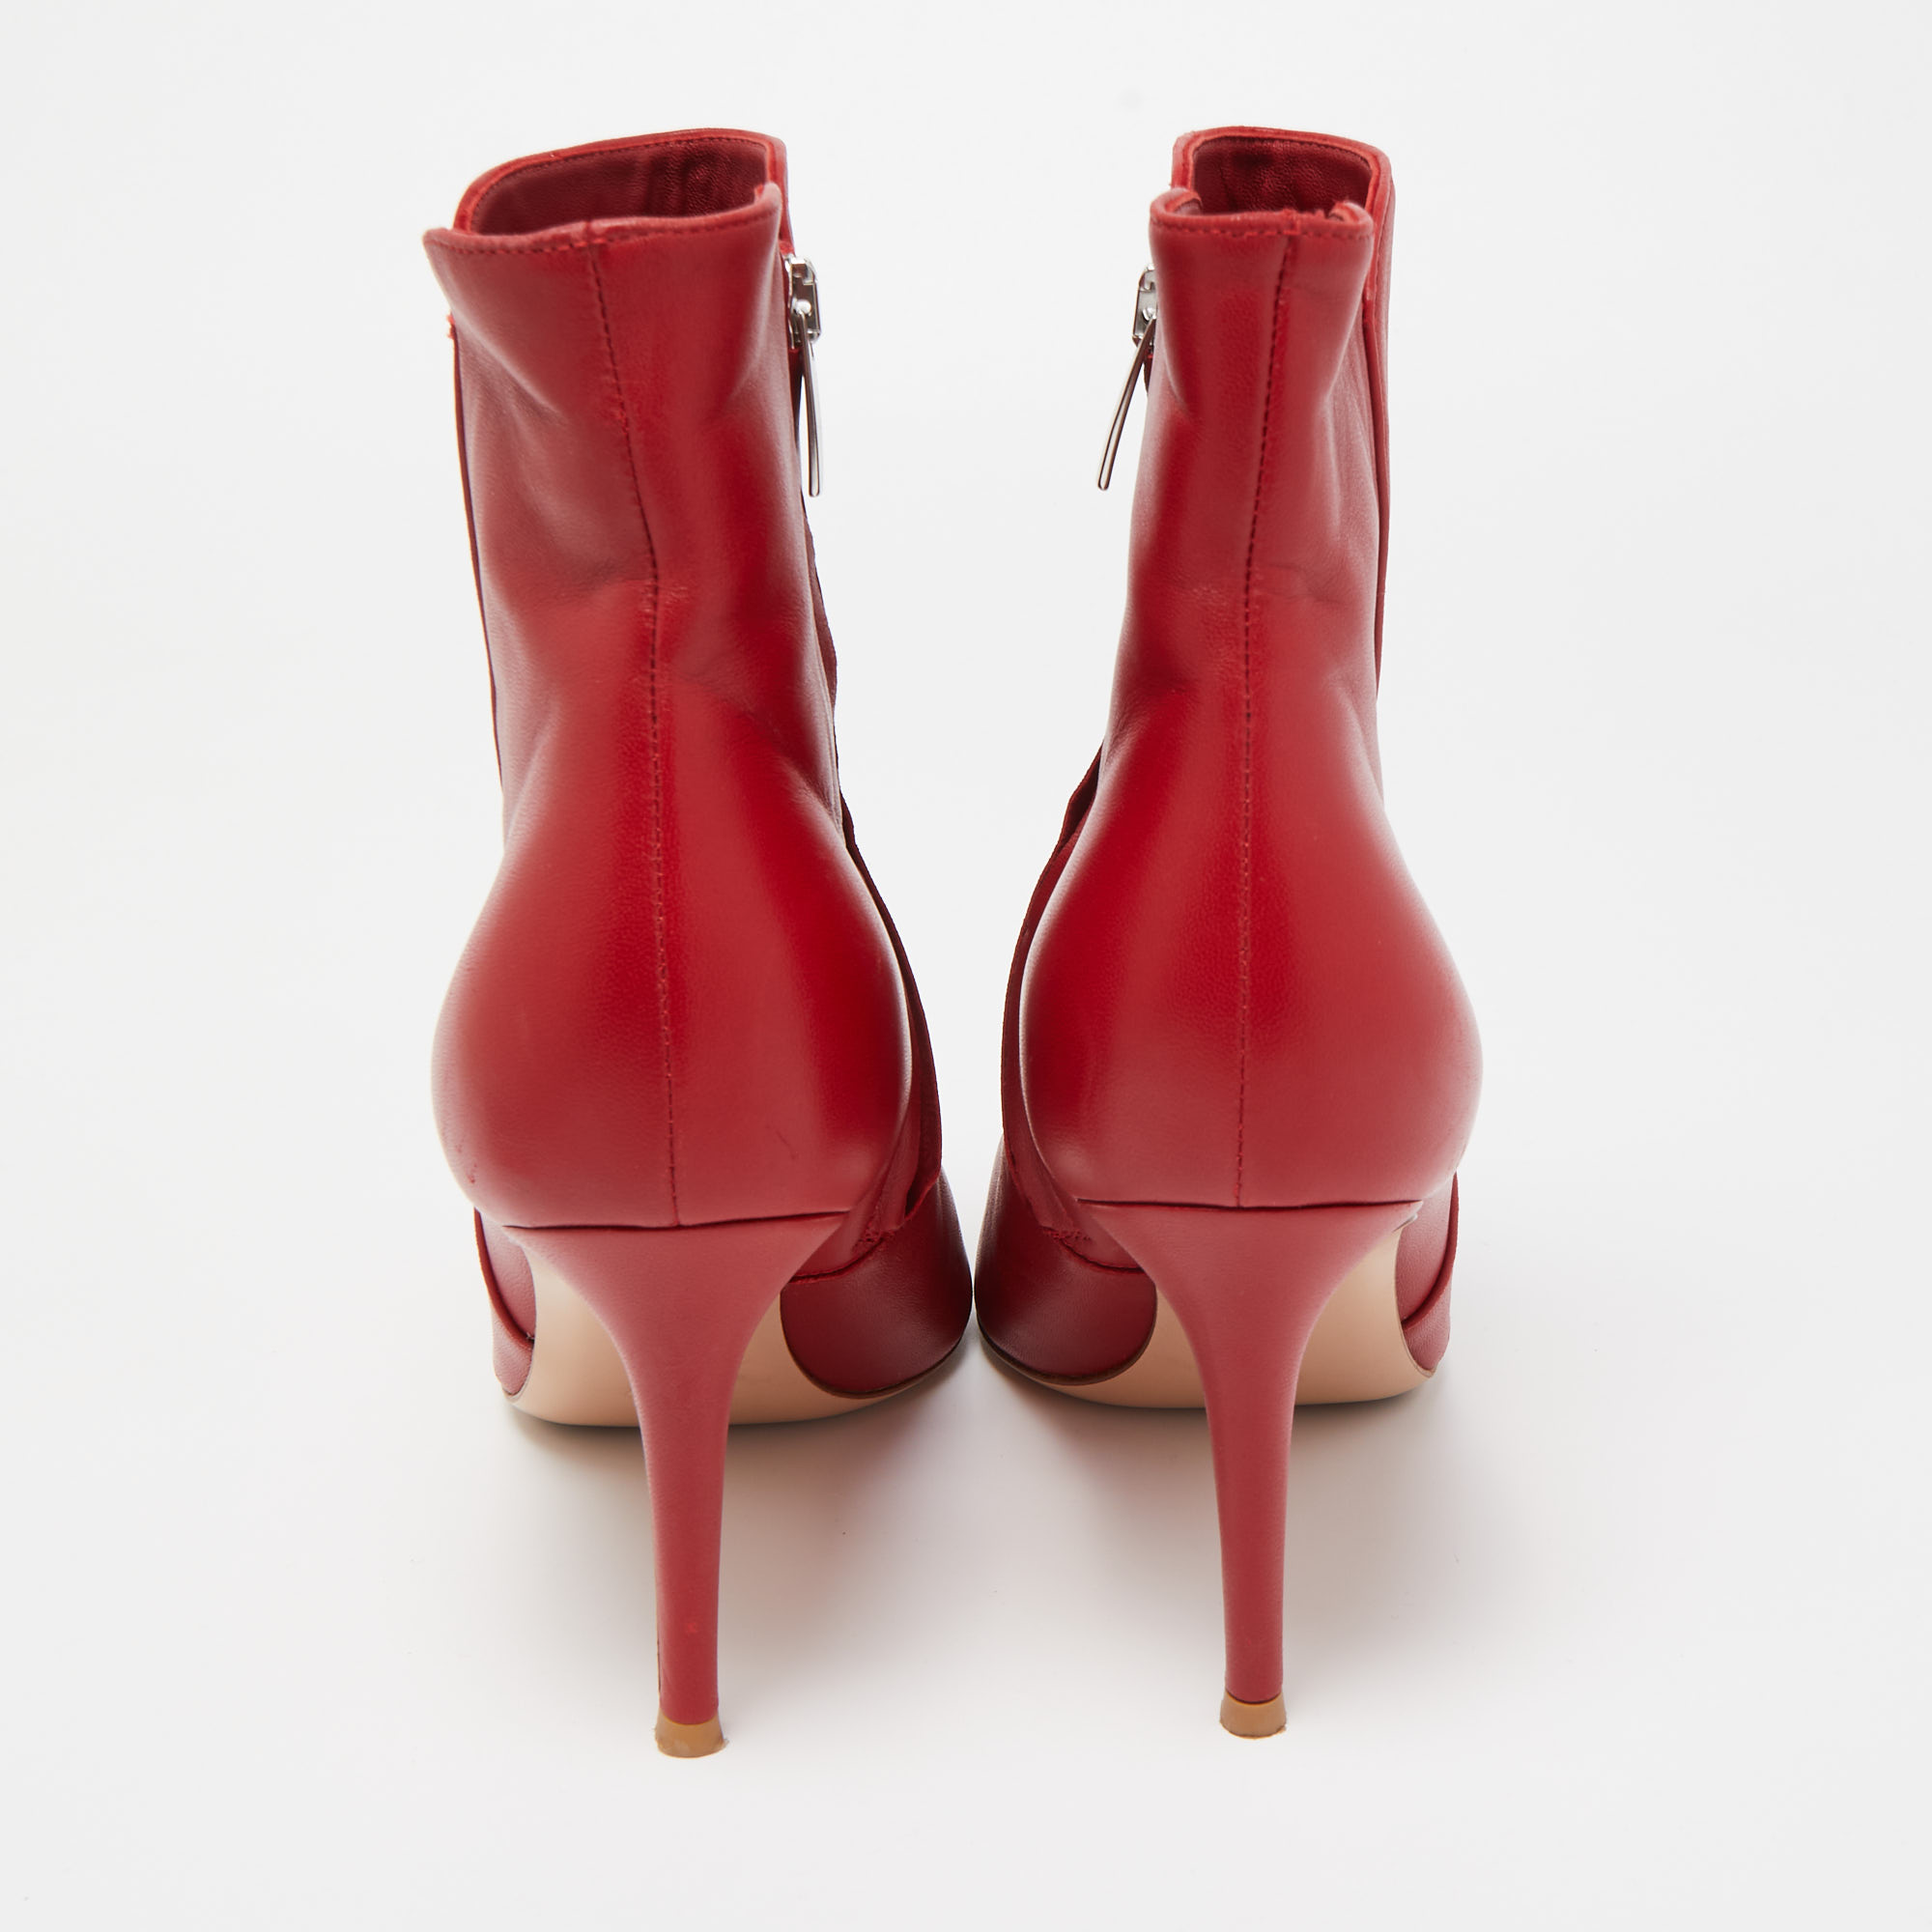 Gianvito Rossi Red Leather Pointed Toe Ankle Length Boots Size 37.5